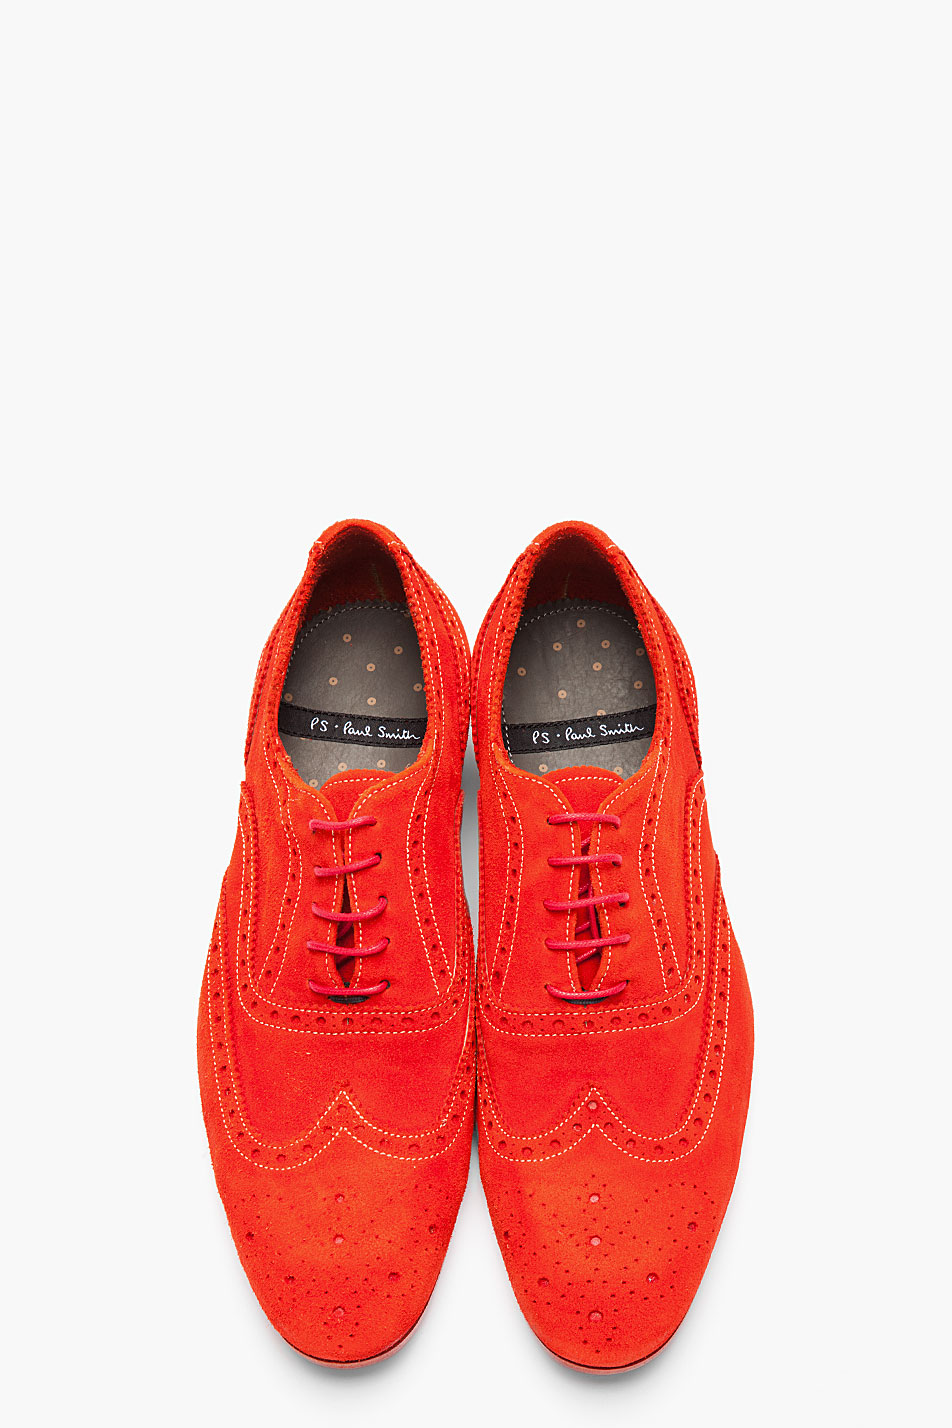 PS by Paul Smith Red Dip Dyed Suede Wingtip Miller Brogues for Men 